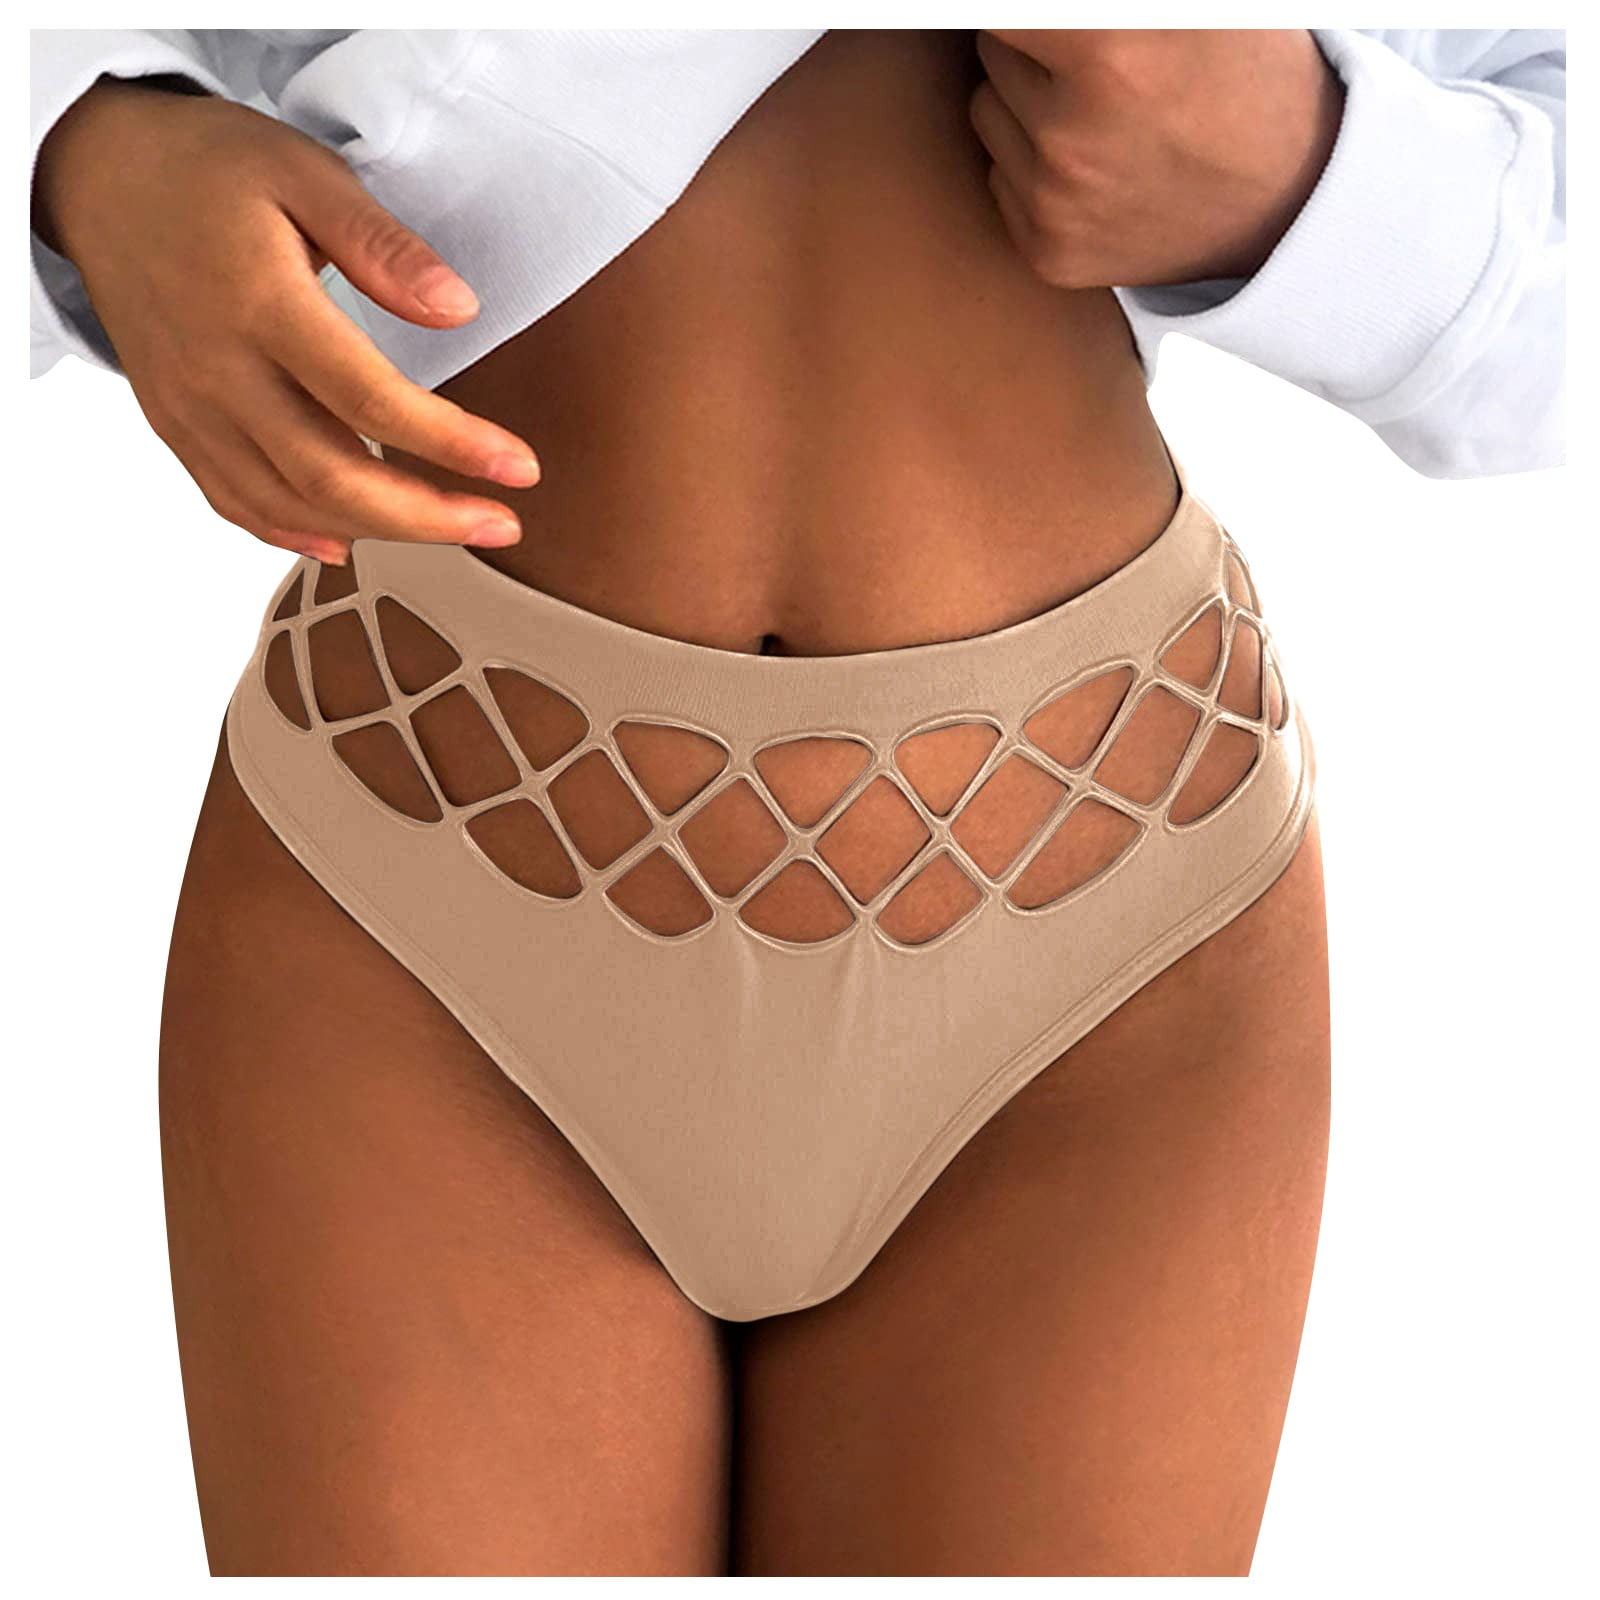 Qcmgmg Women Underwear on Clearance Seamless Low Rise Hollow Out Briefs  Underwear for Women Plus Size Khaki M